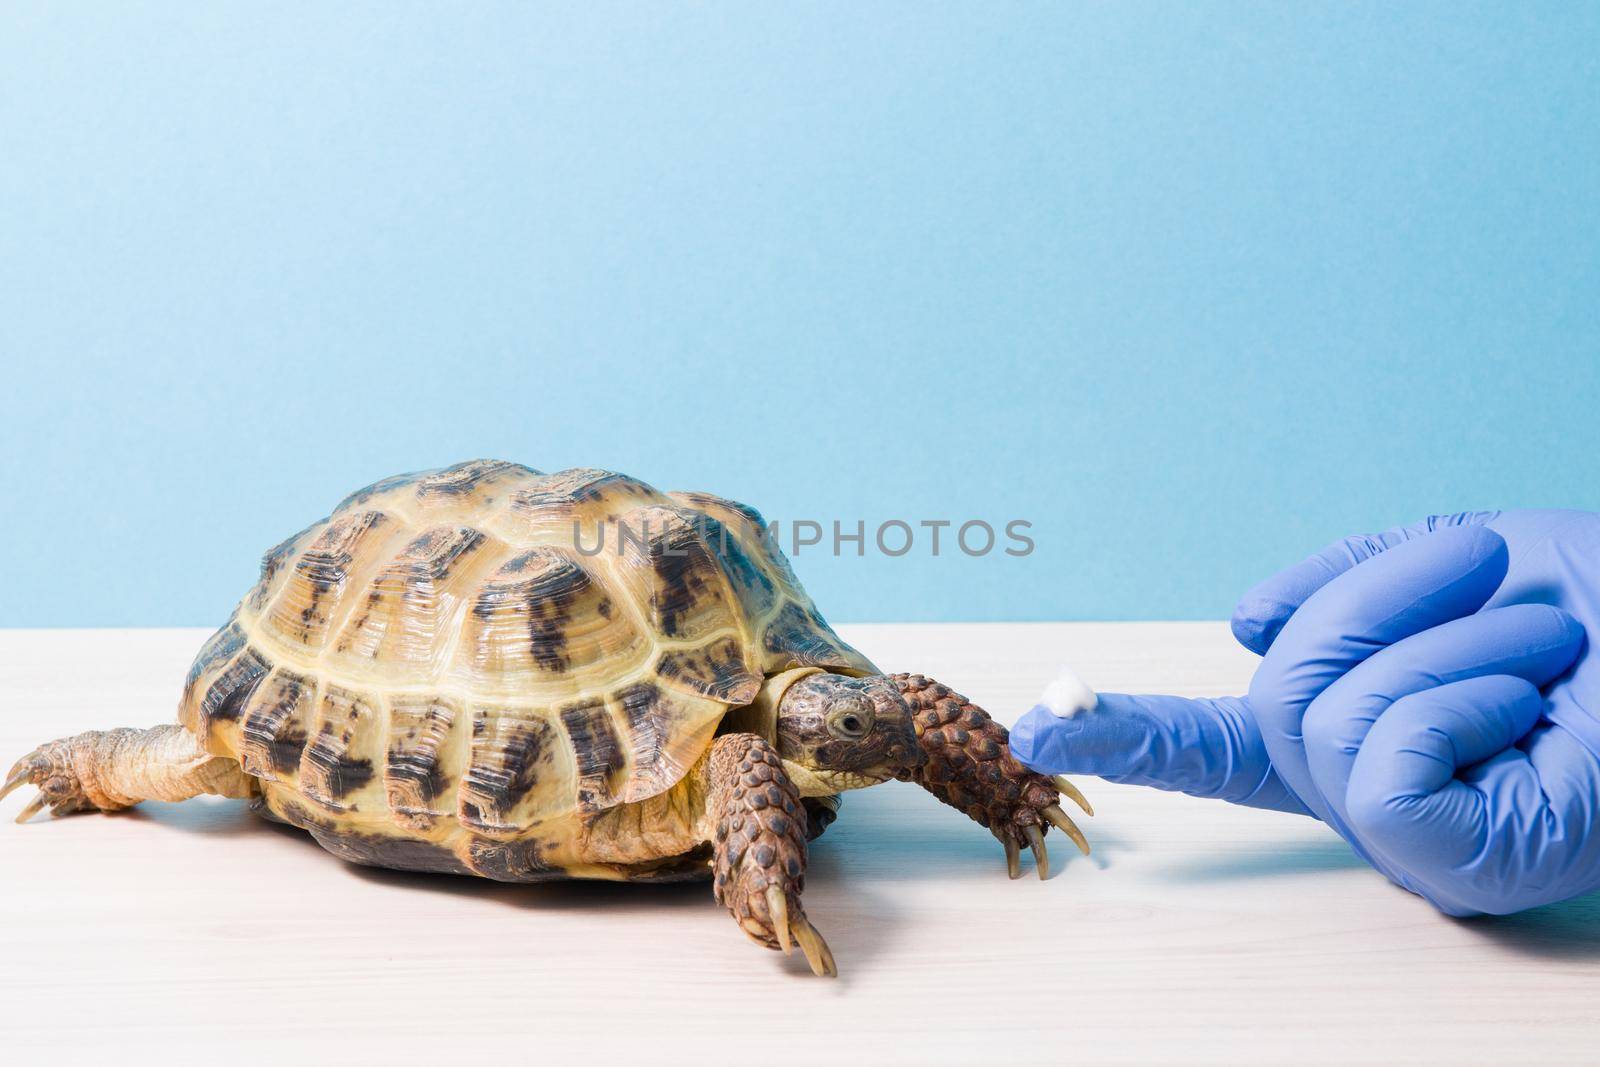 the hand of the herpetologist's veterinarian ointment covers the shell of the turtle, the hand in a rubber glove with a drop of antifungal ointment on the finger, treatment of turtles